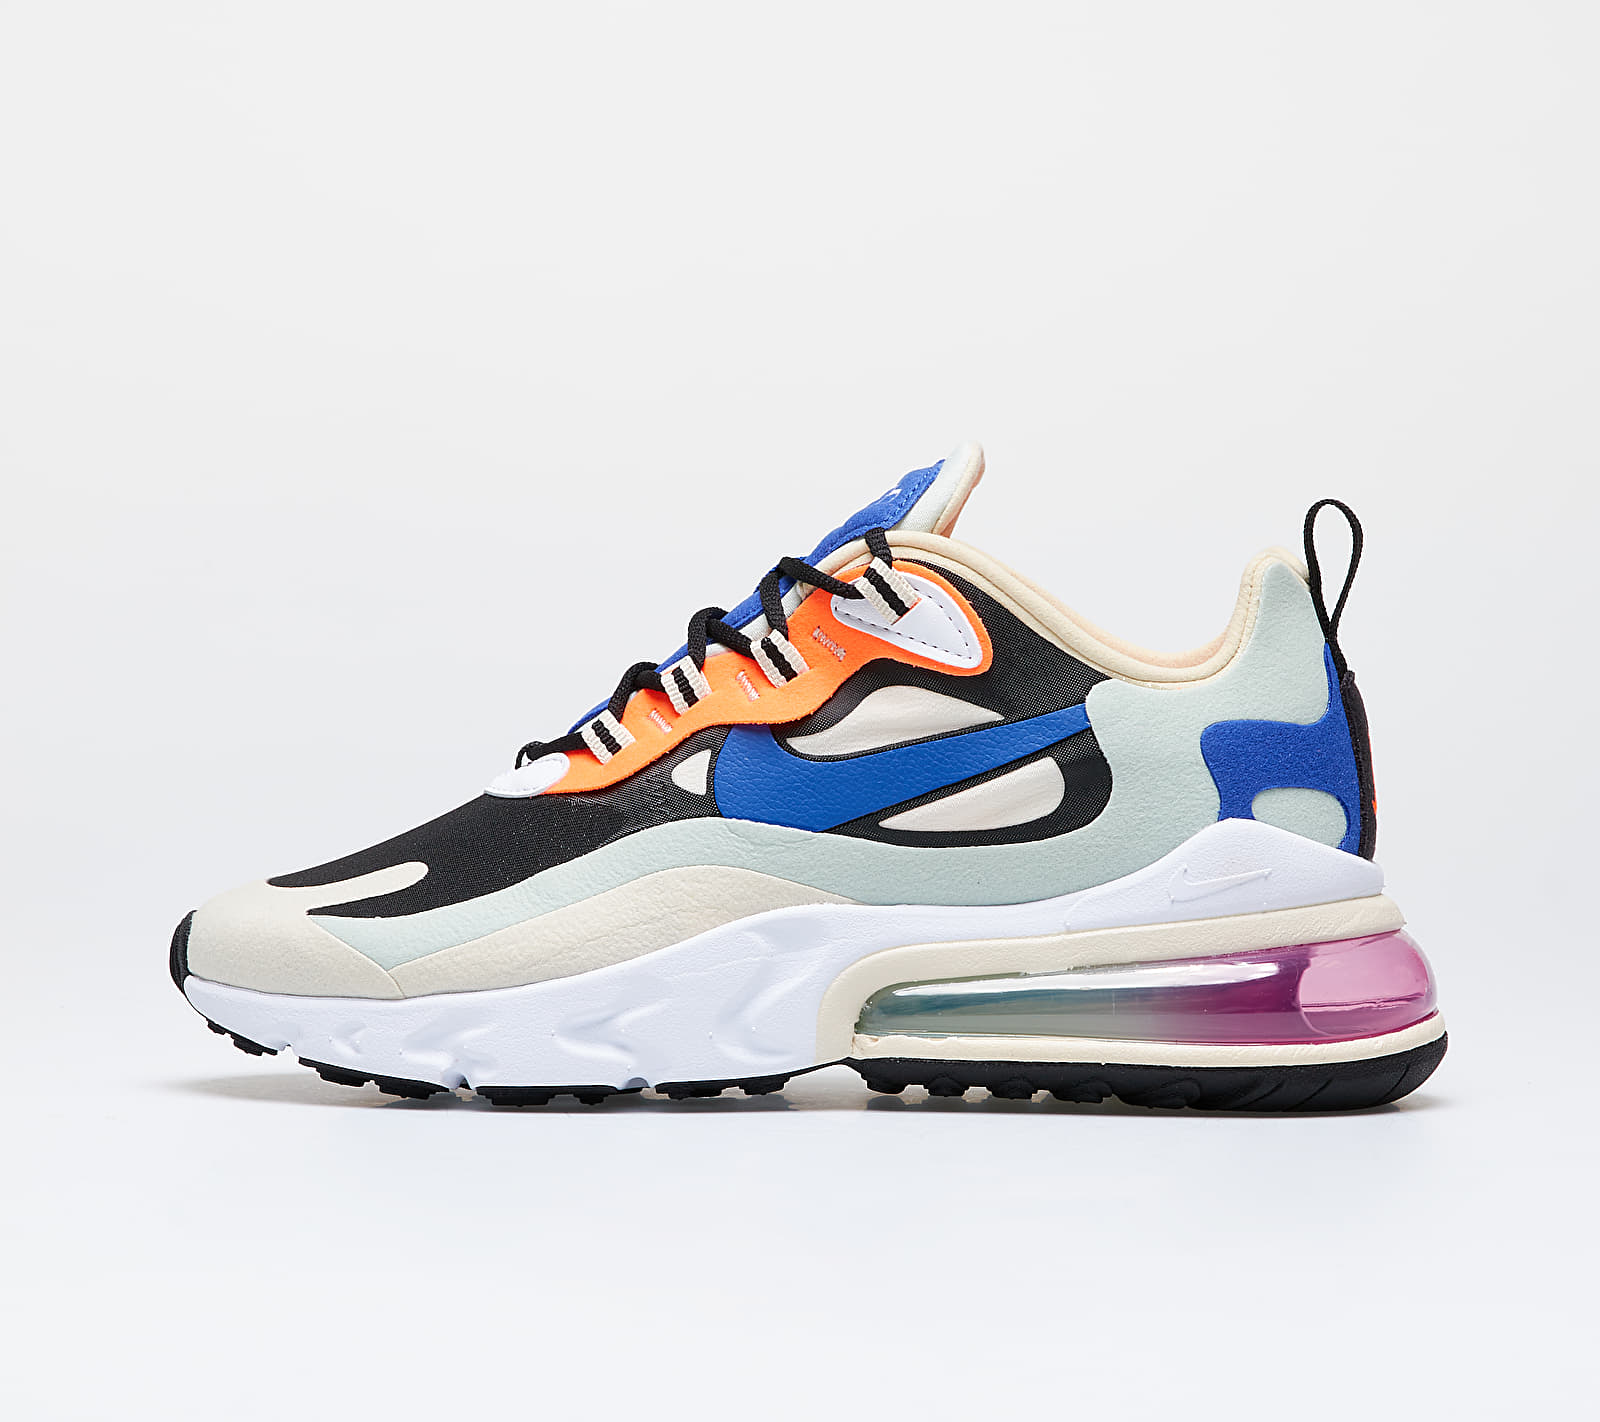 Nike W Air Max 270 React Fossil/ Hyper Blue-Black-Pistachio Frost